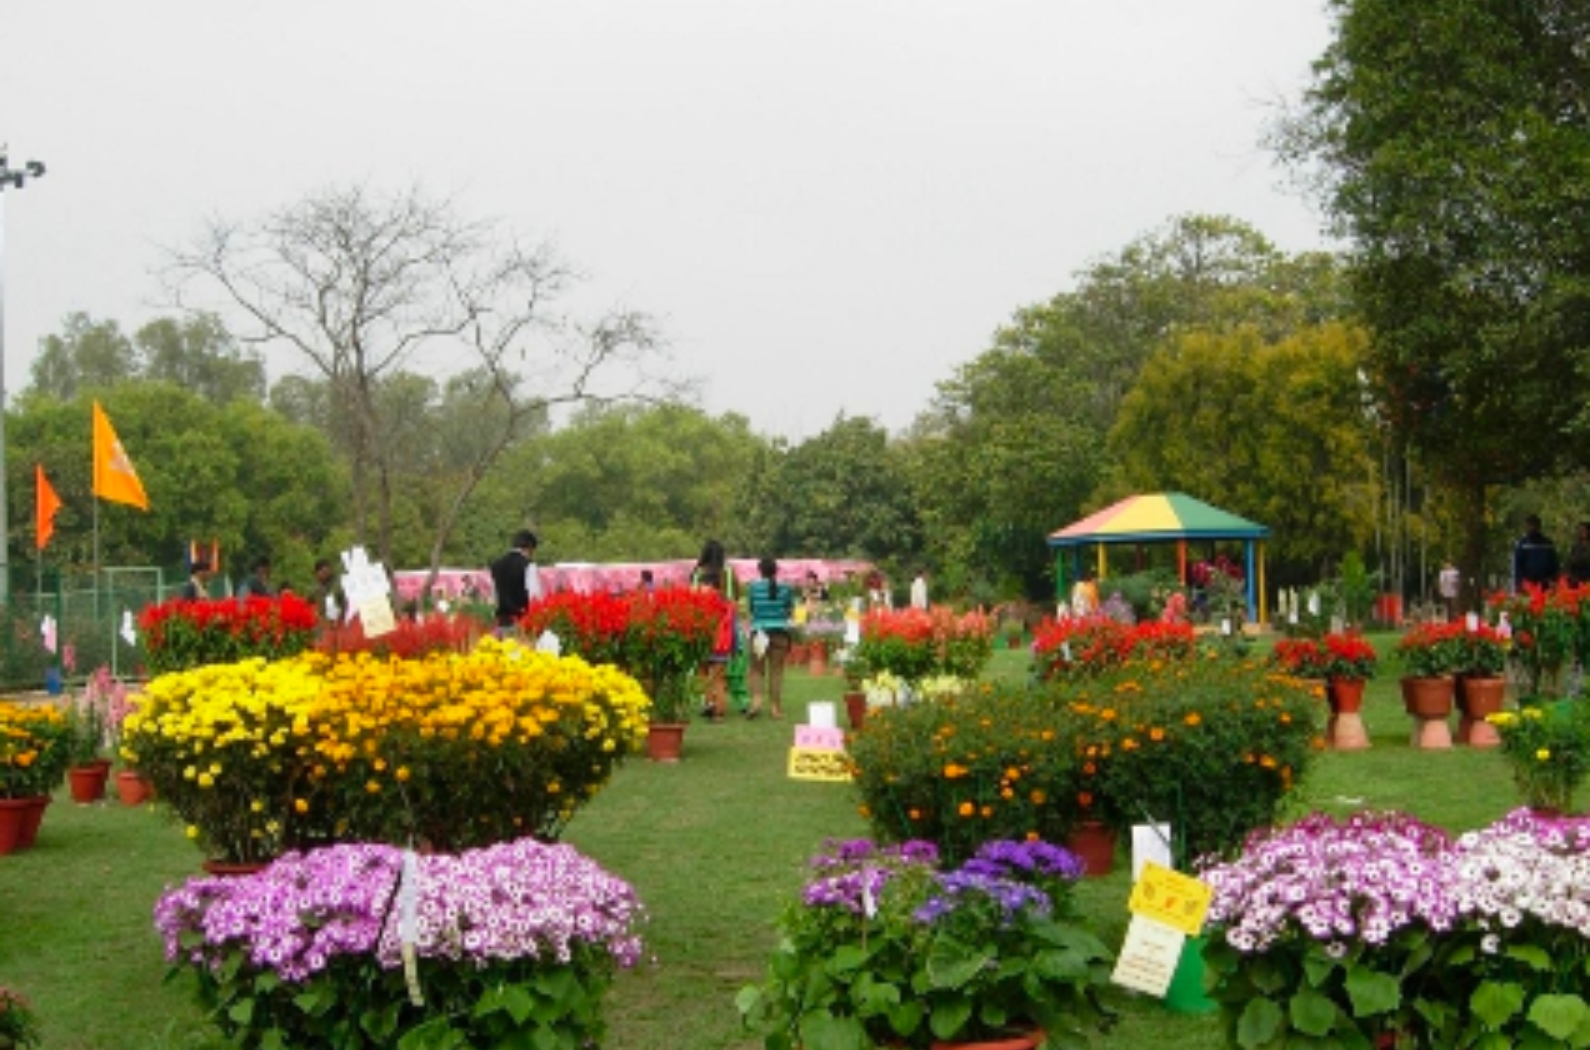 This park is located in the heart of Gurgaon. It is a very famous place. It is a perfect place for a picnic in the winter afternoons.